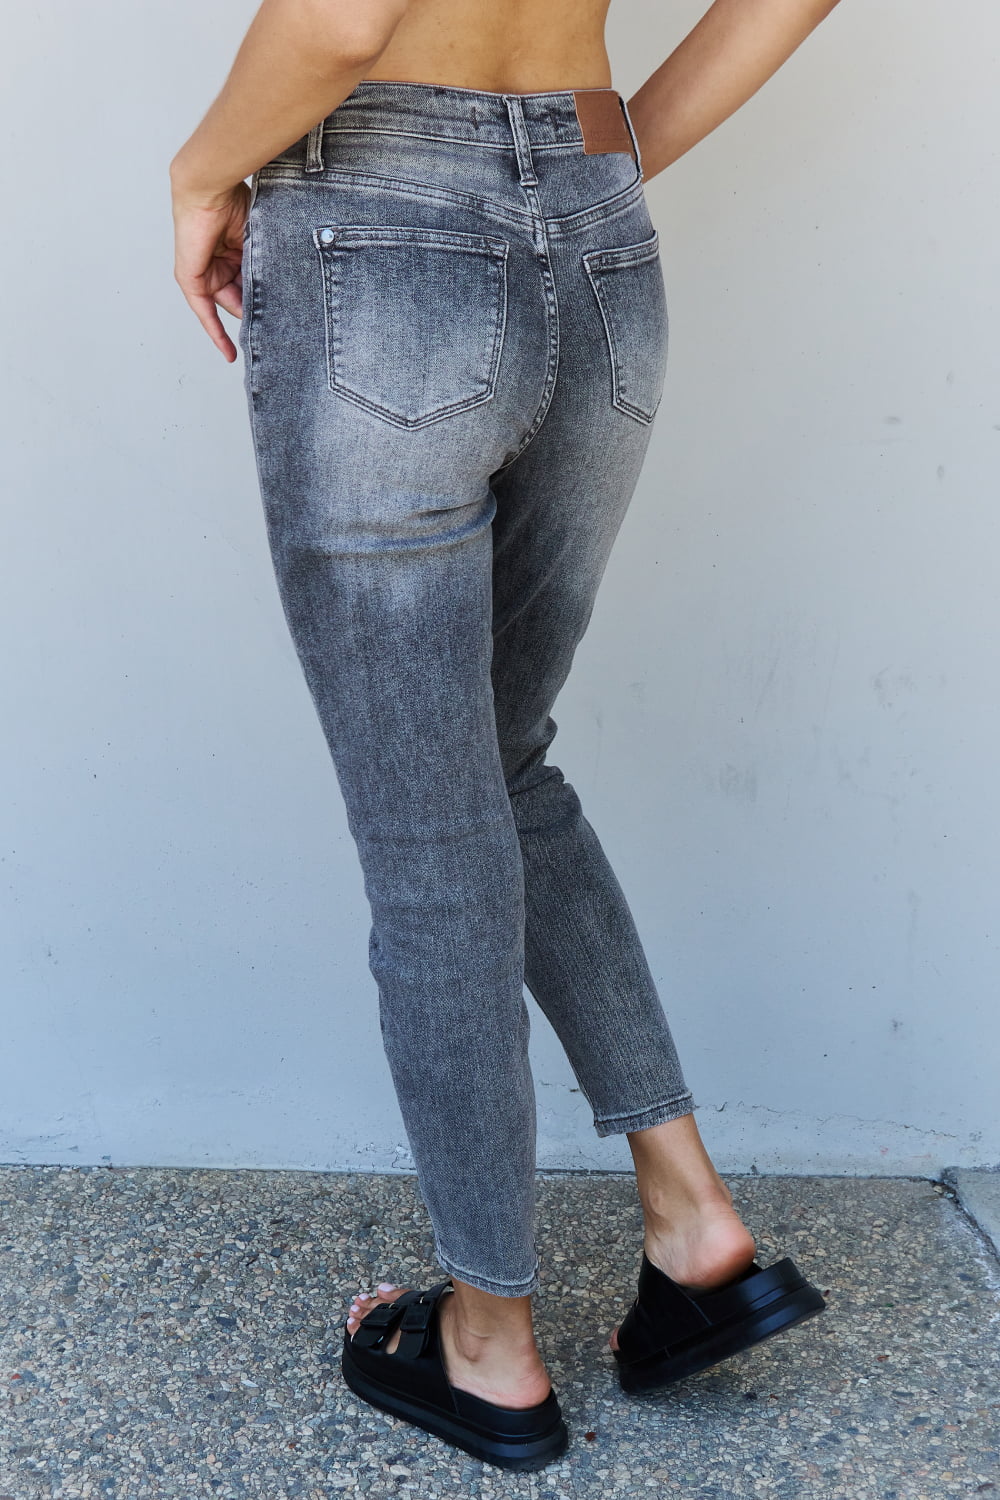 Stone Washed Elegance: Judy Blue Racquel High Waisted Slim Fit Jeans